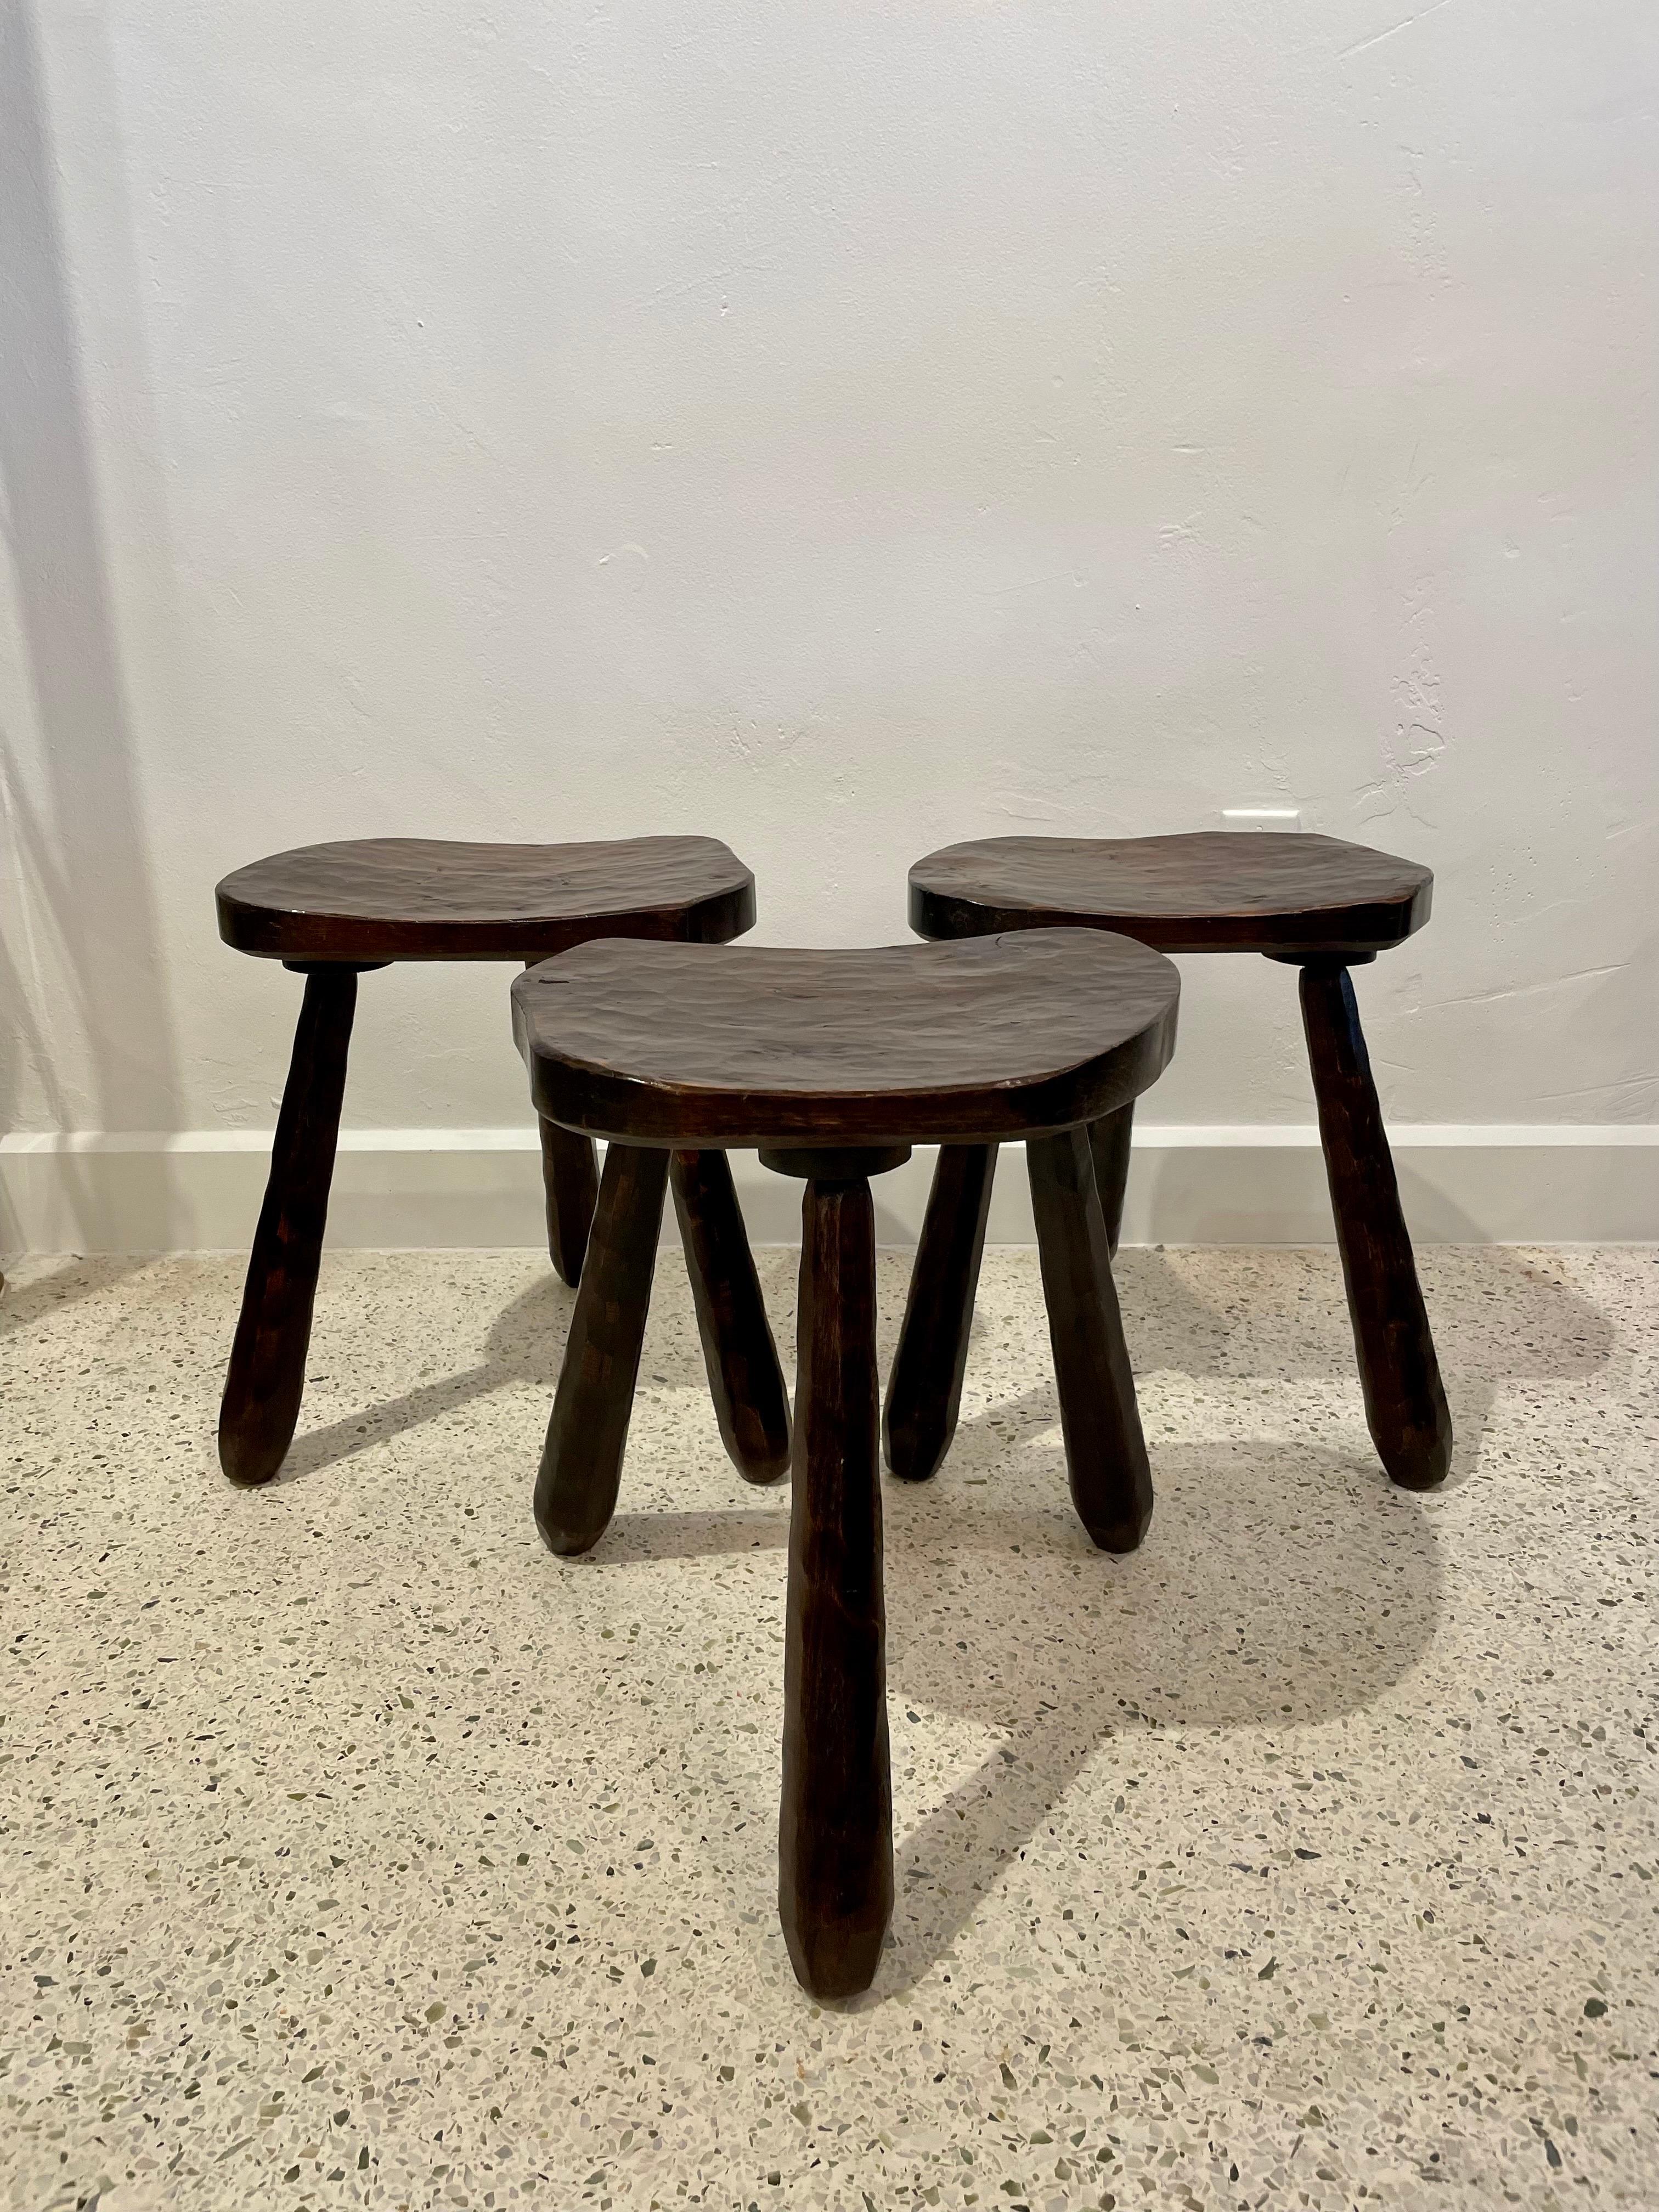 These are a rare set of 3 hand carved dark wood stools, very sturdy and excellent for additional seating.